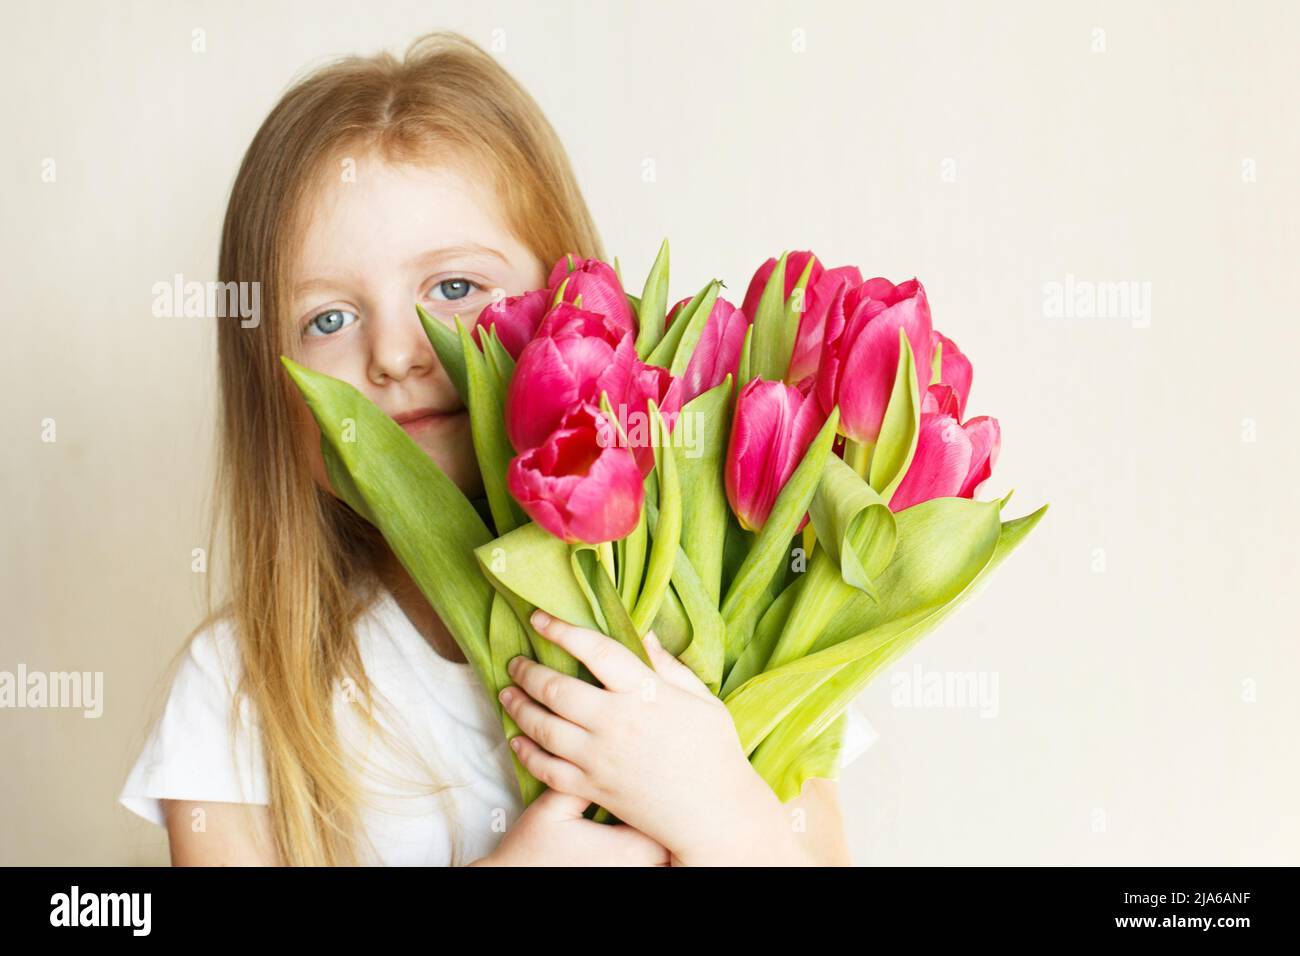 portrait of a happy smiling litlle girl with bouquet of flowers tulips in her hands Stock Photo